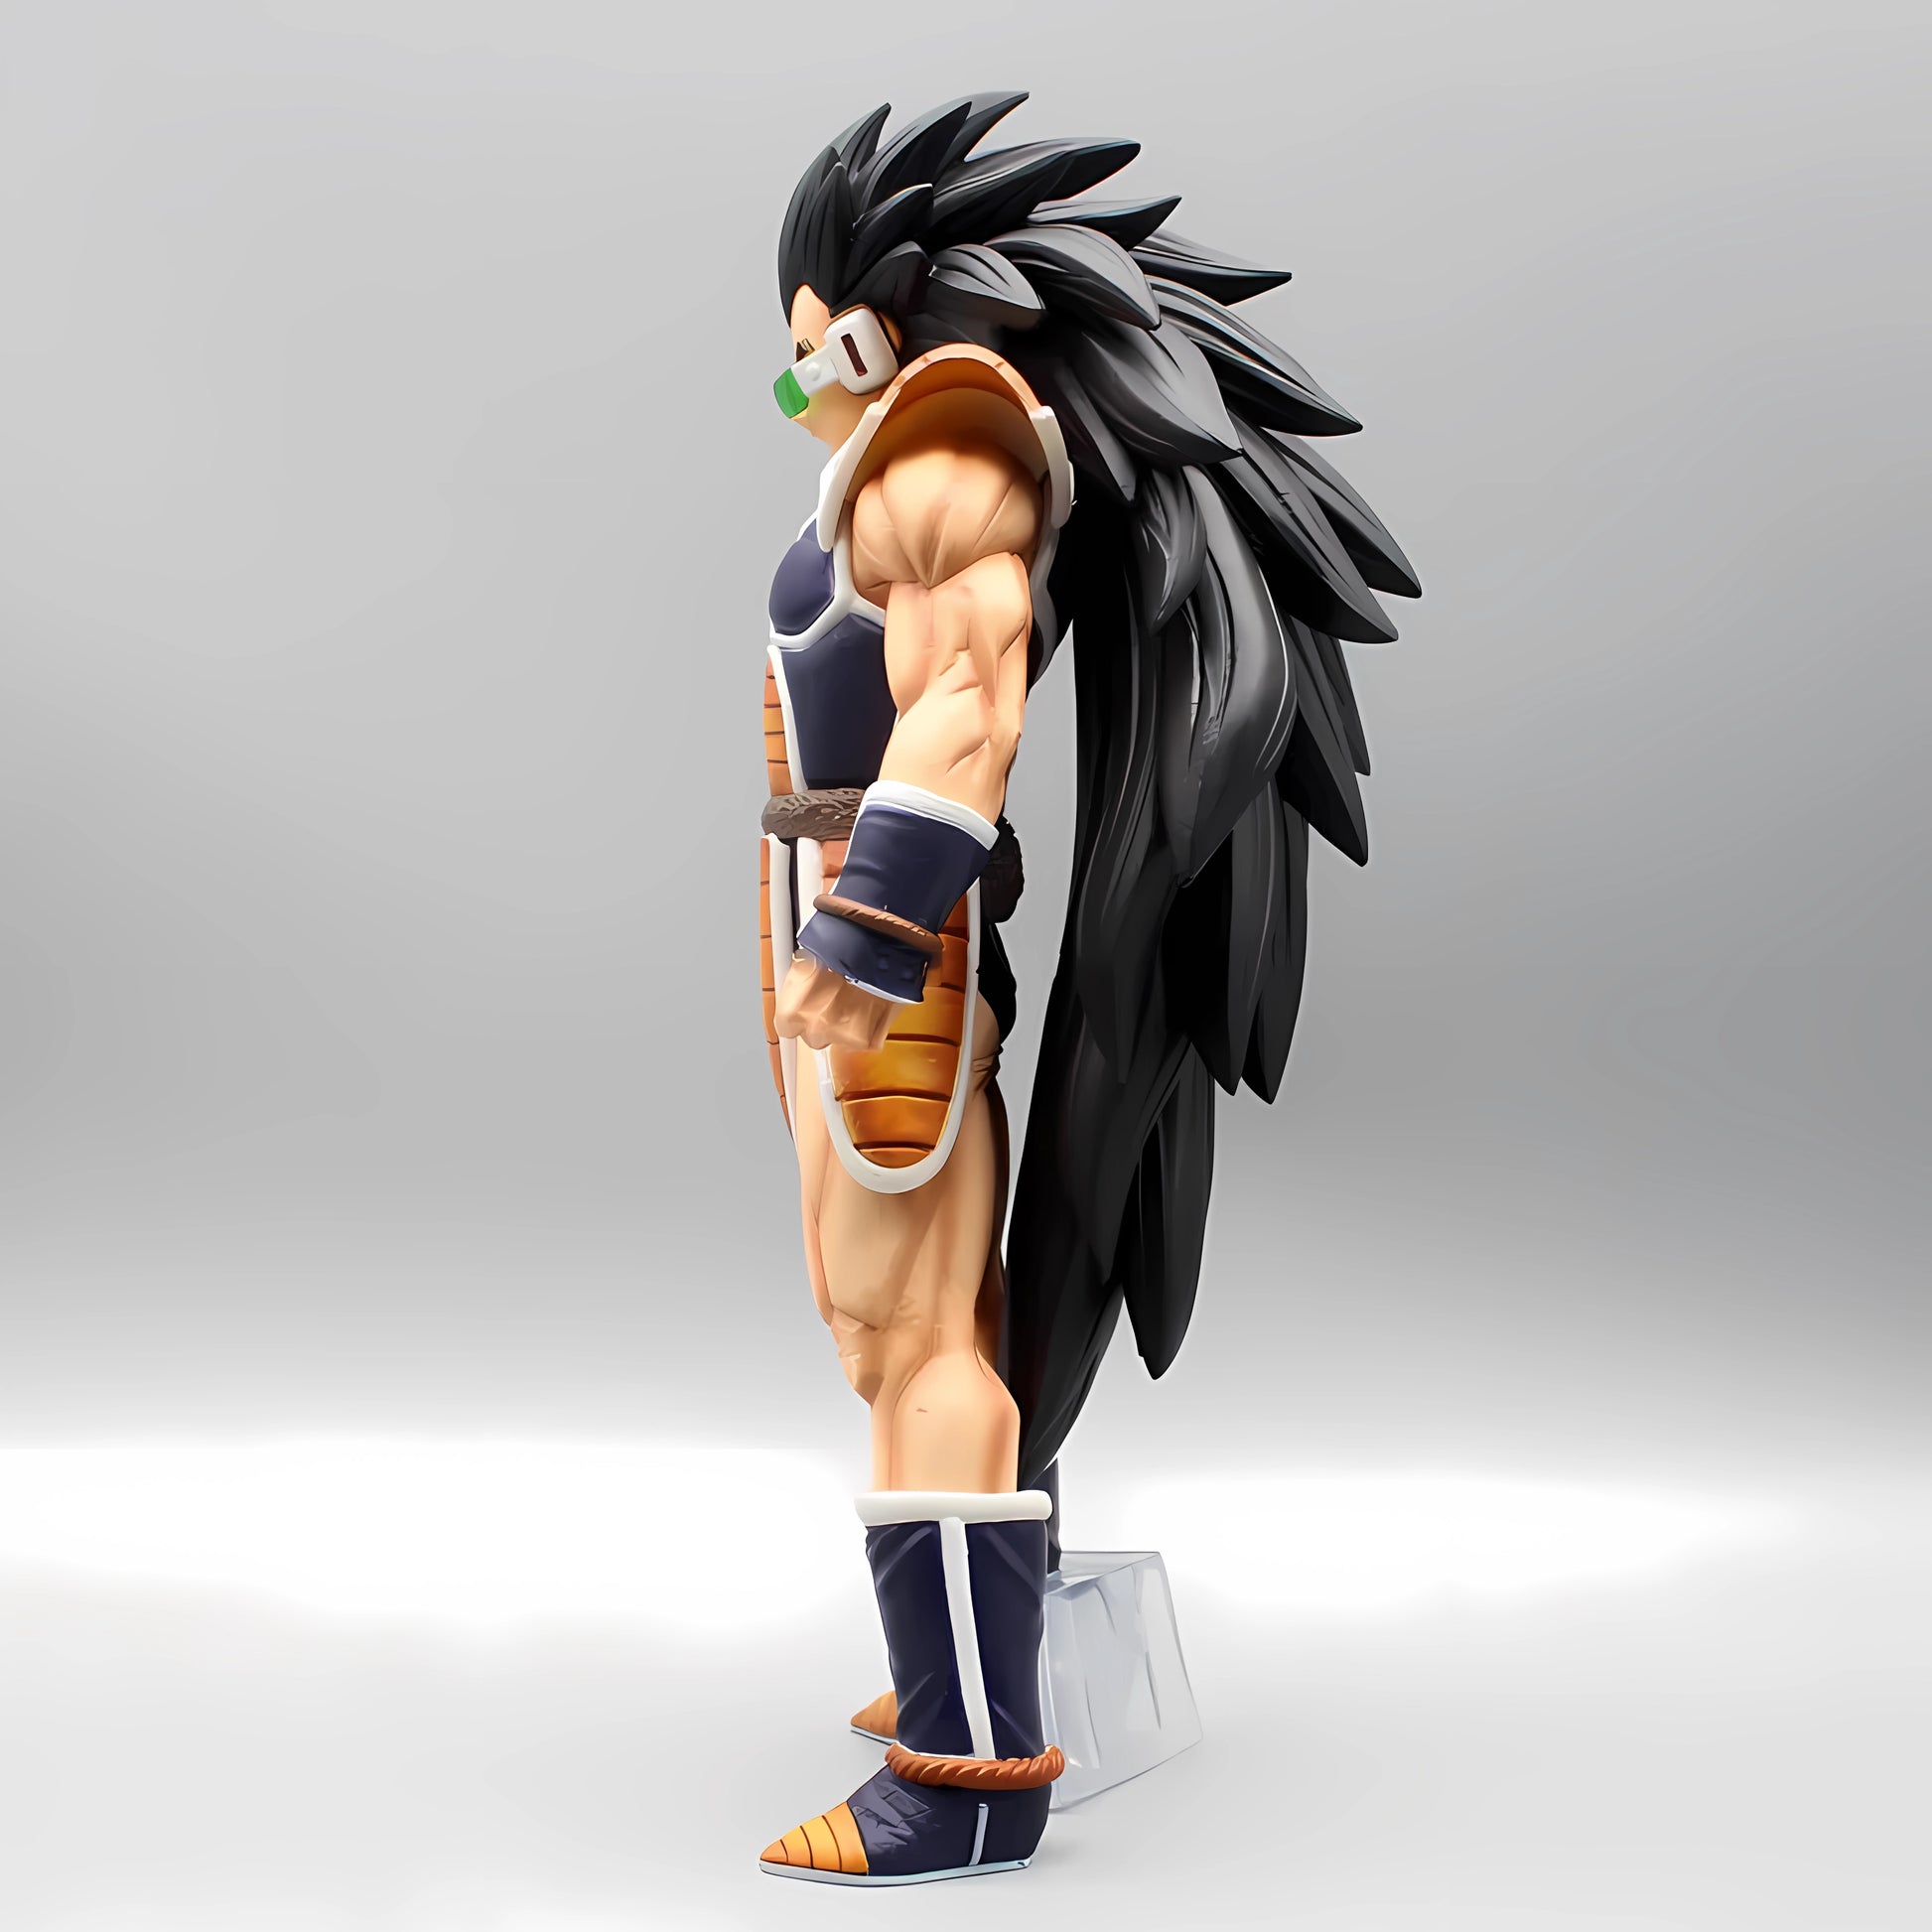 Profile view of the Raditz Dragon Ball collectible highlighting his combat stance, Saiyan armor design, and the distinctive black hair trailing behind